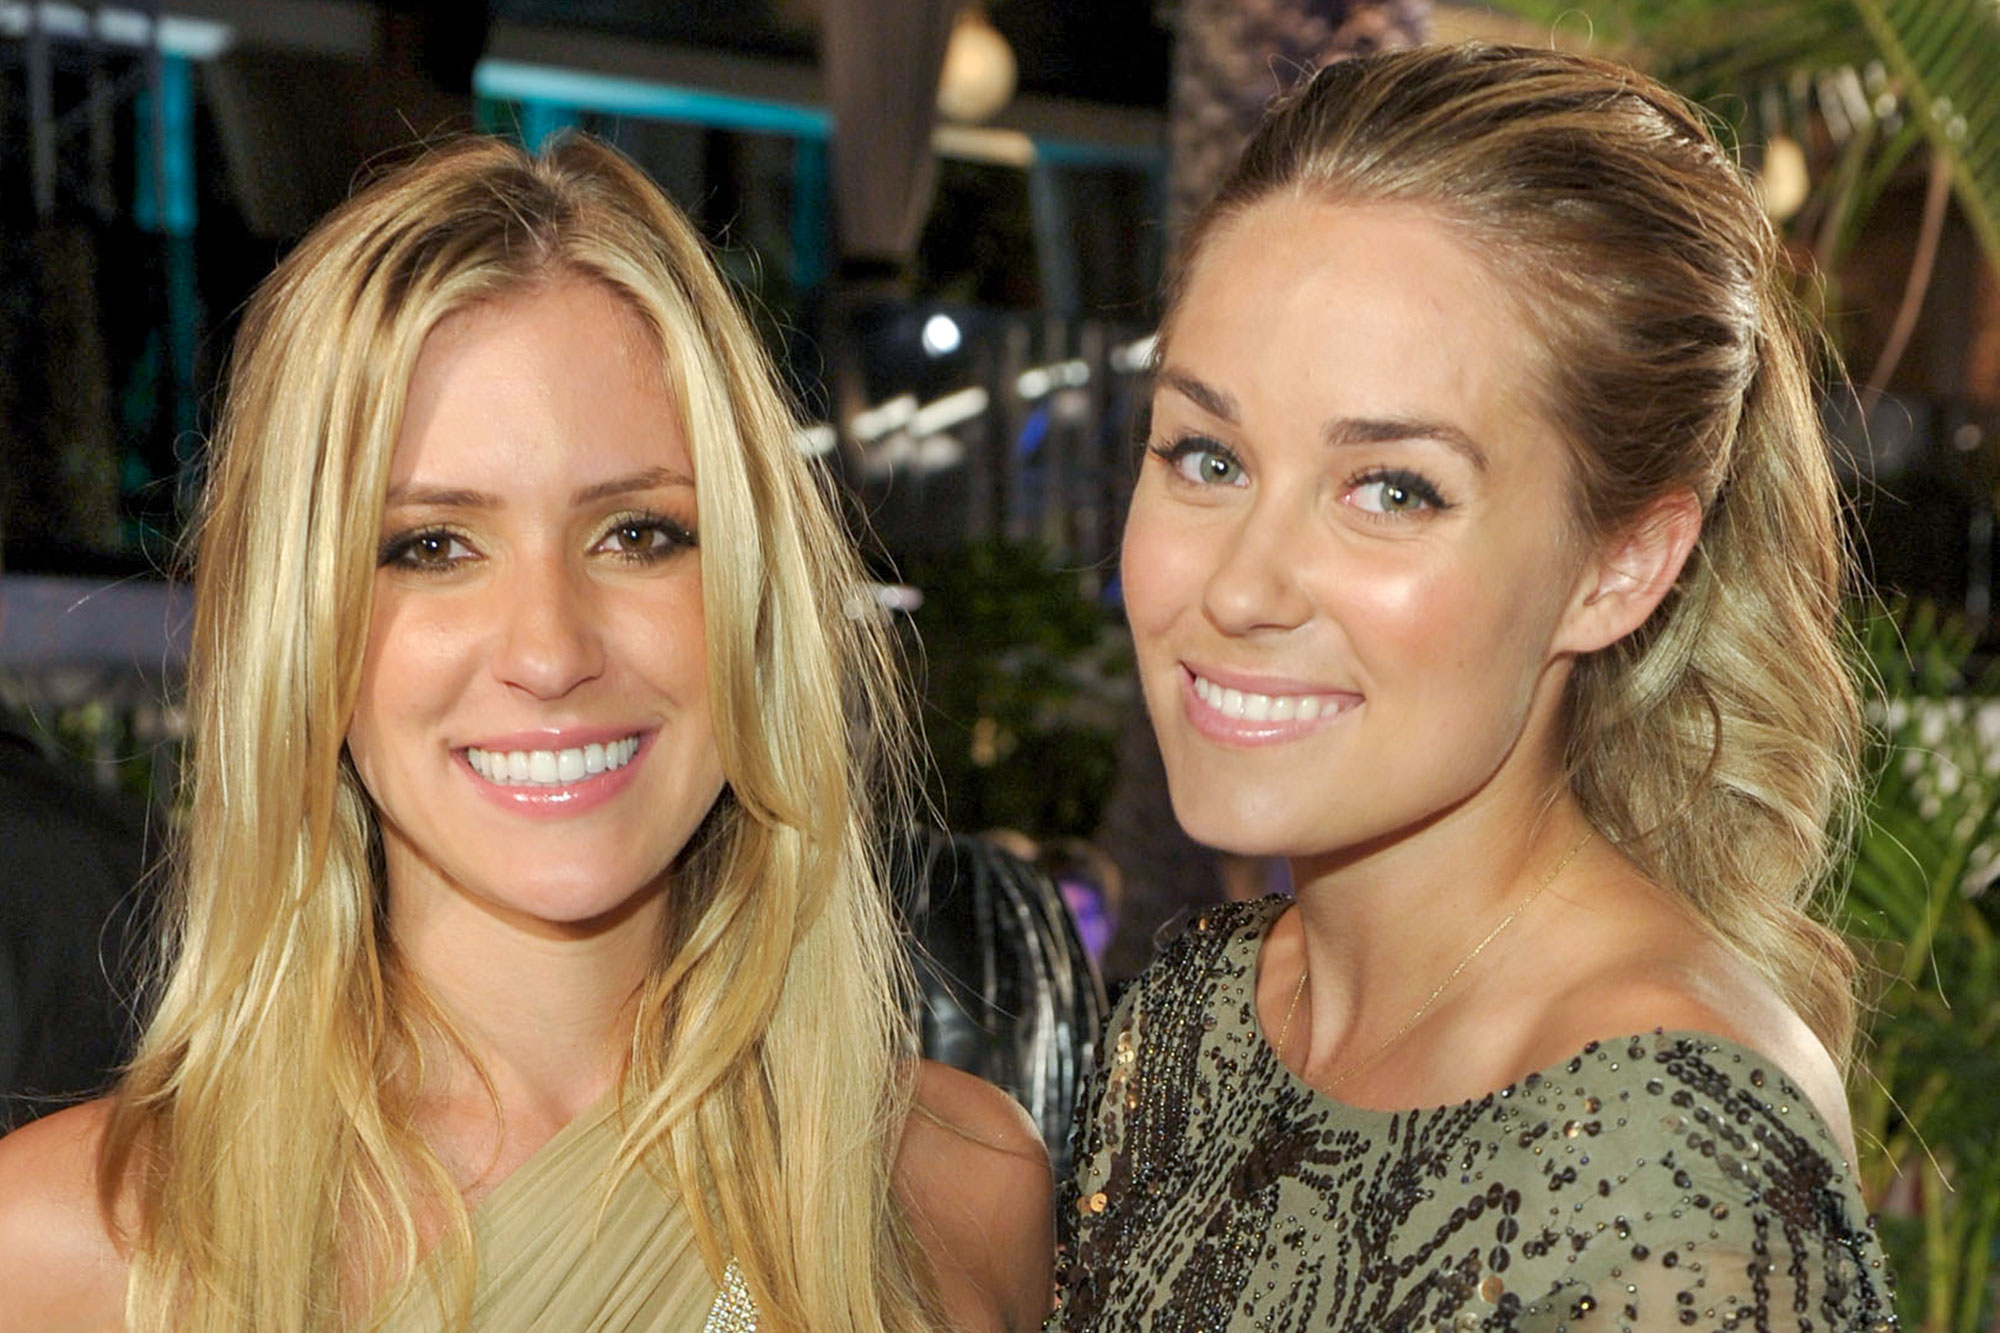 Kristin Cavallari (L) and Lauren Conrad attend MTV's "The Hills Live: A Hollywood Ending" Finale event held at The Roosevelt Hotel on July 13, 2010 in Hollywood, California.